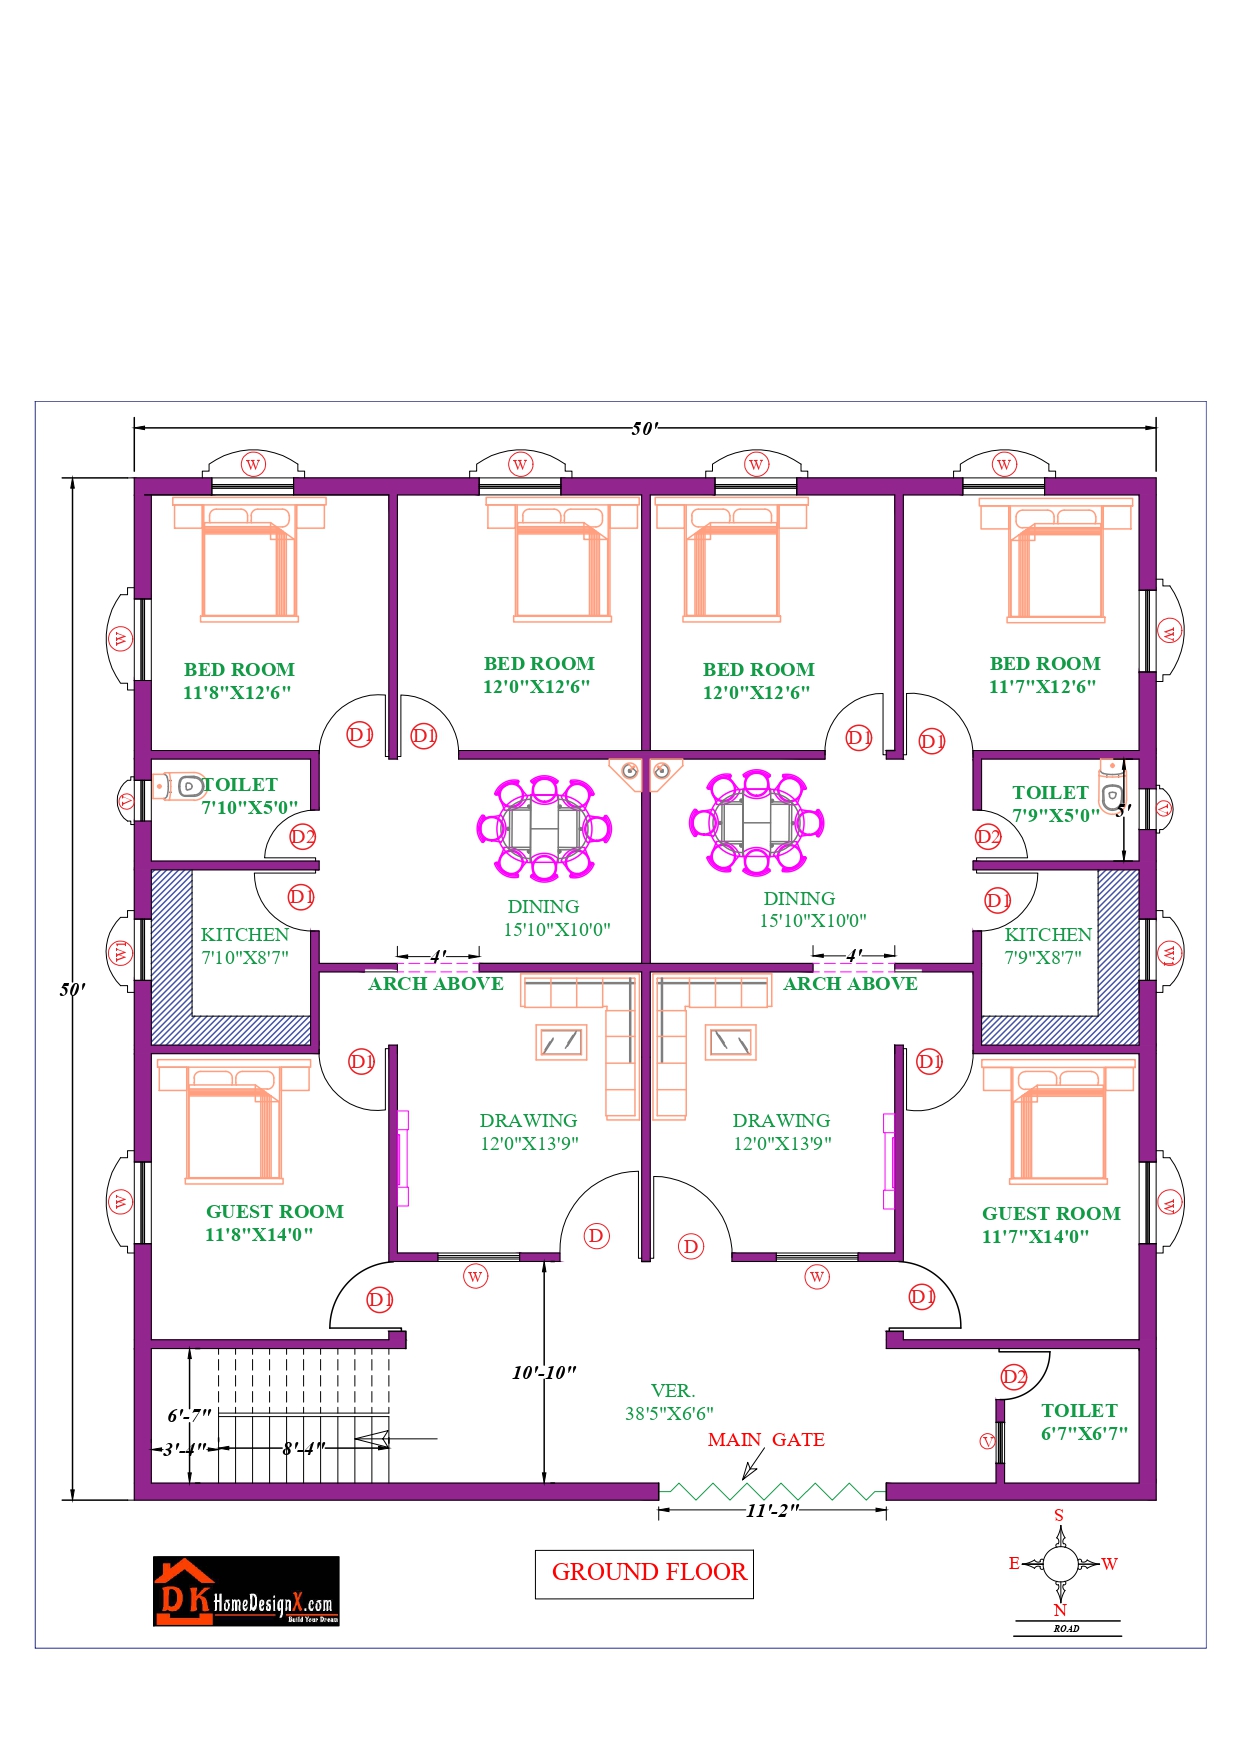 50X50 Affordable House Design for Two Brothers DK Home